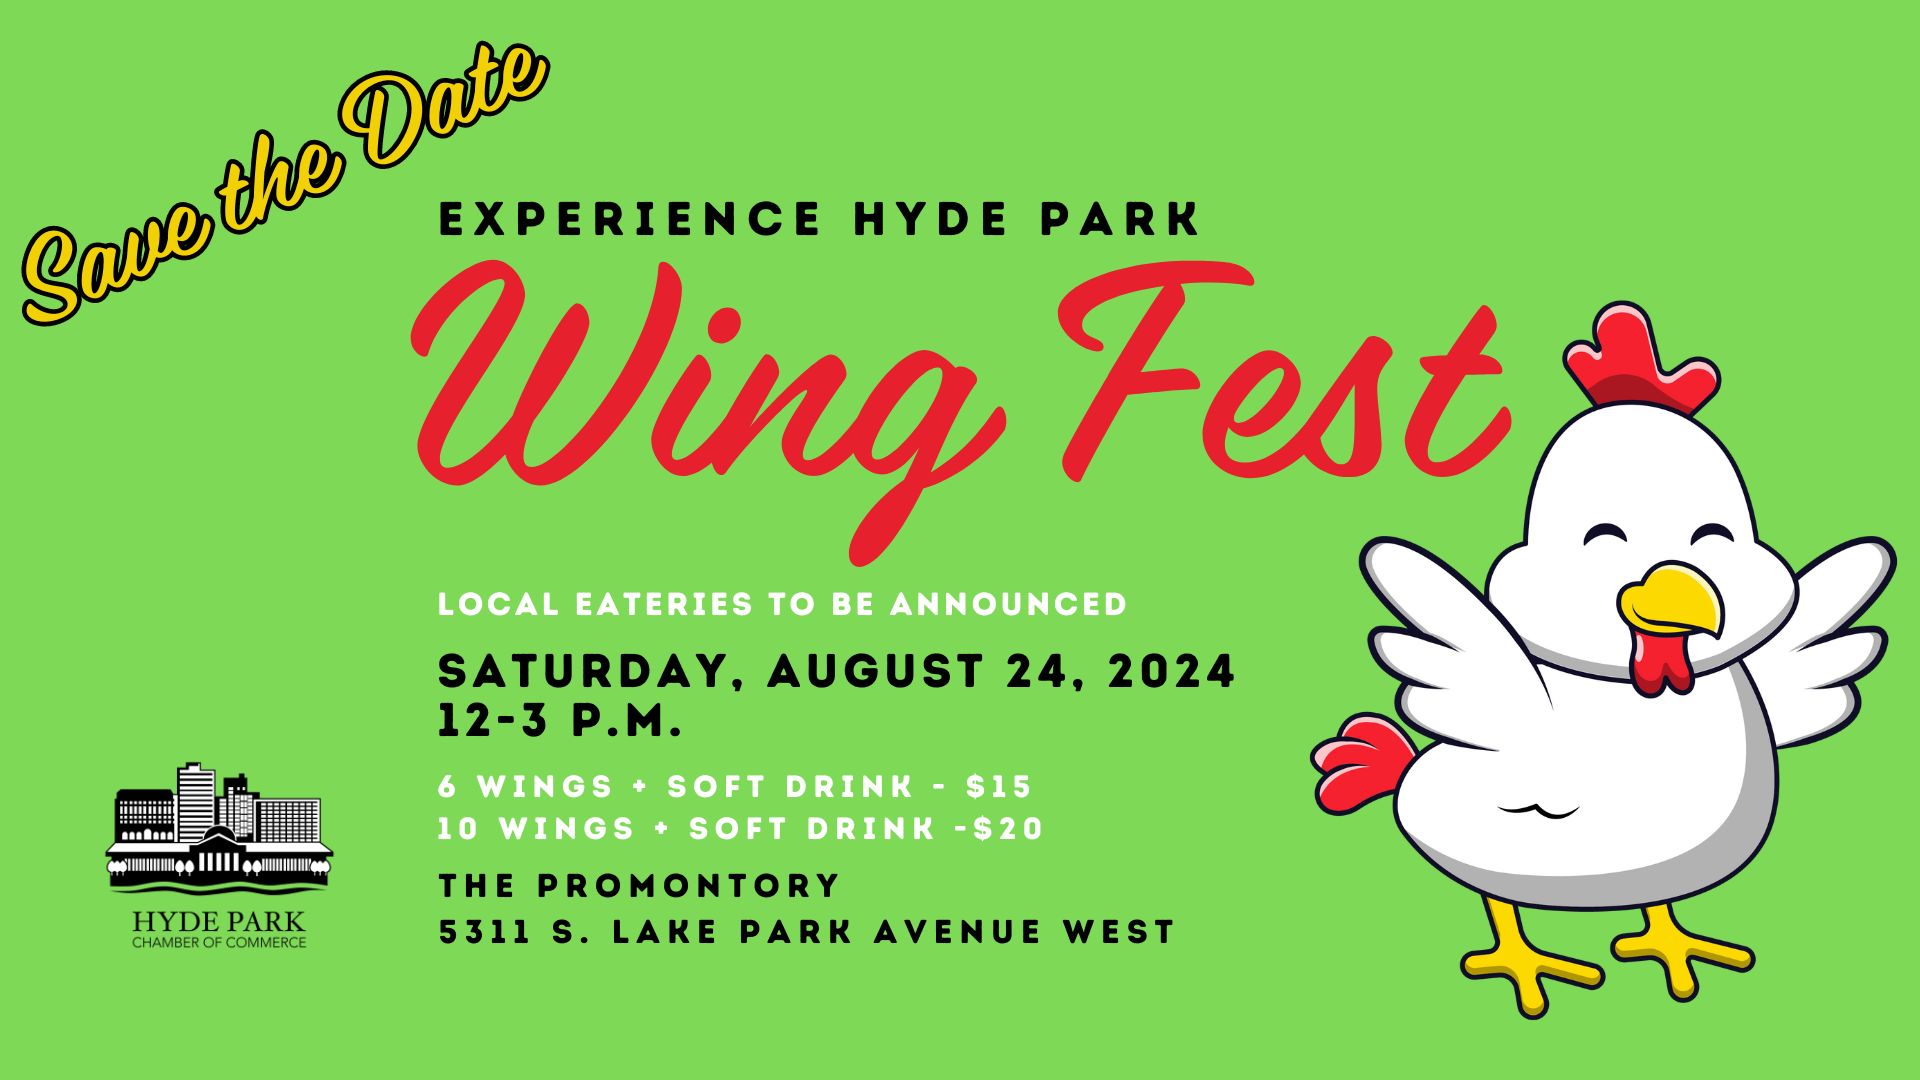 Wing Fest Save The Date